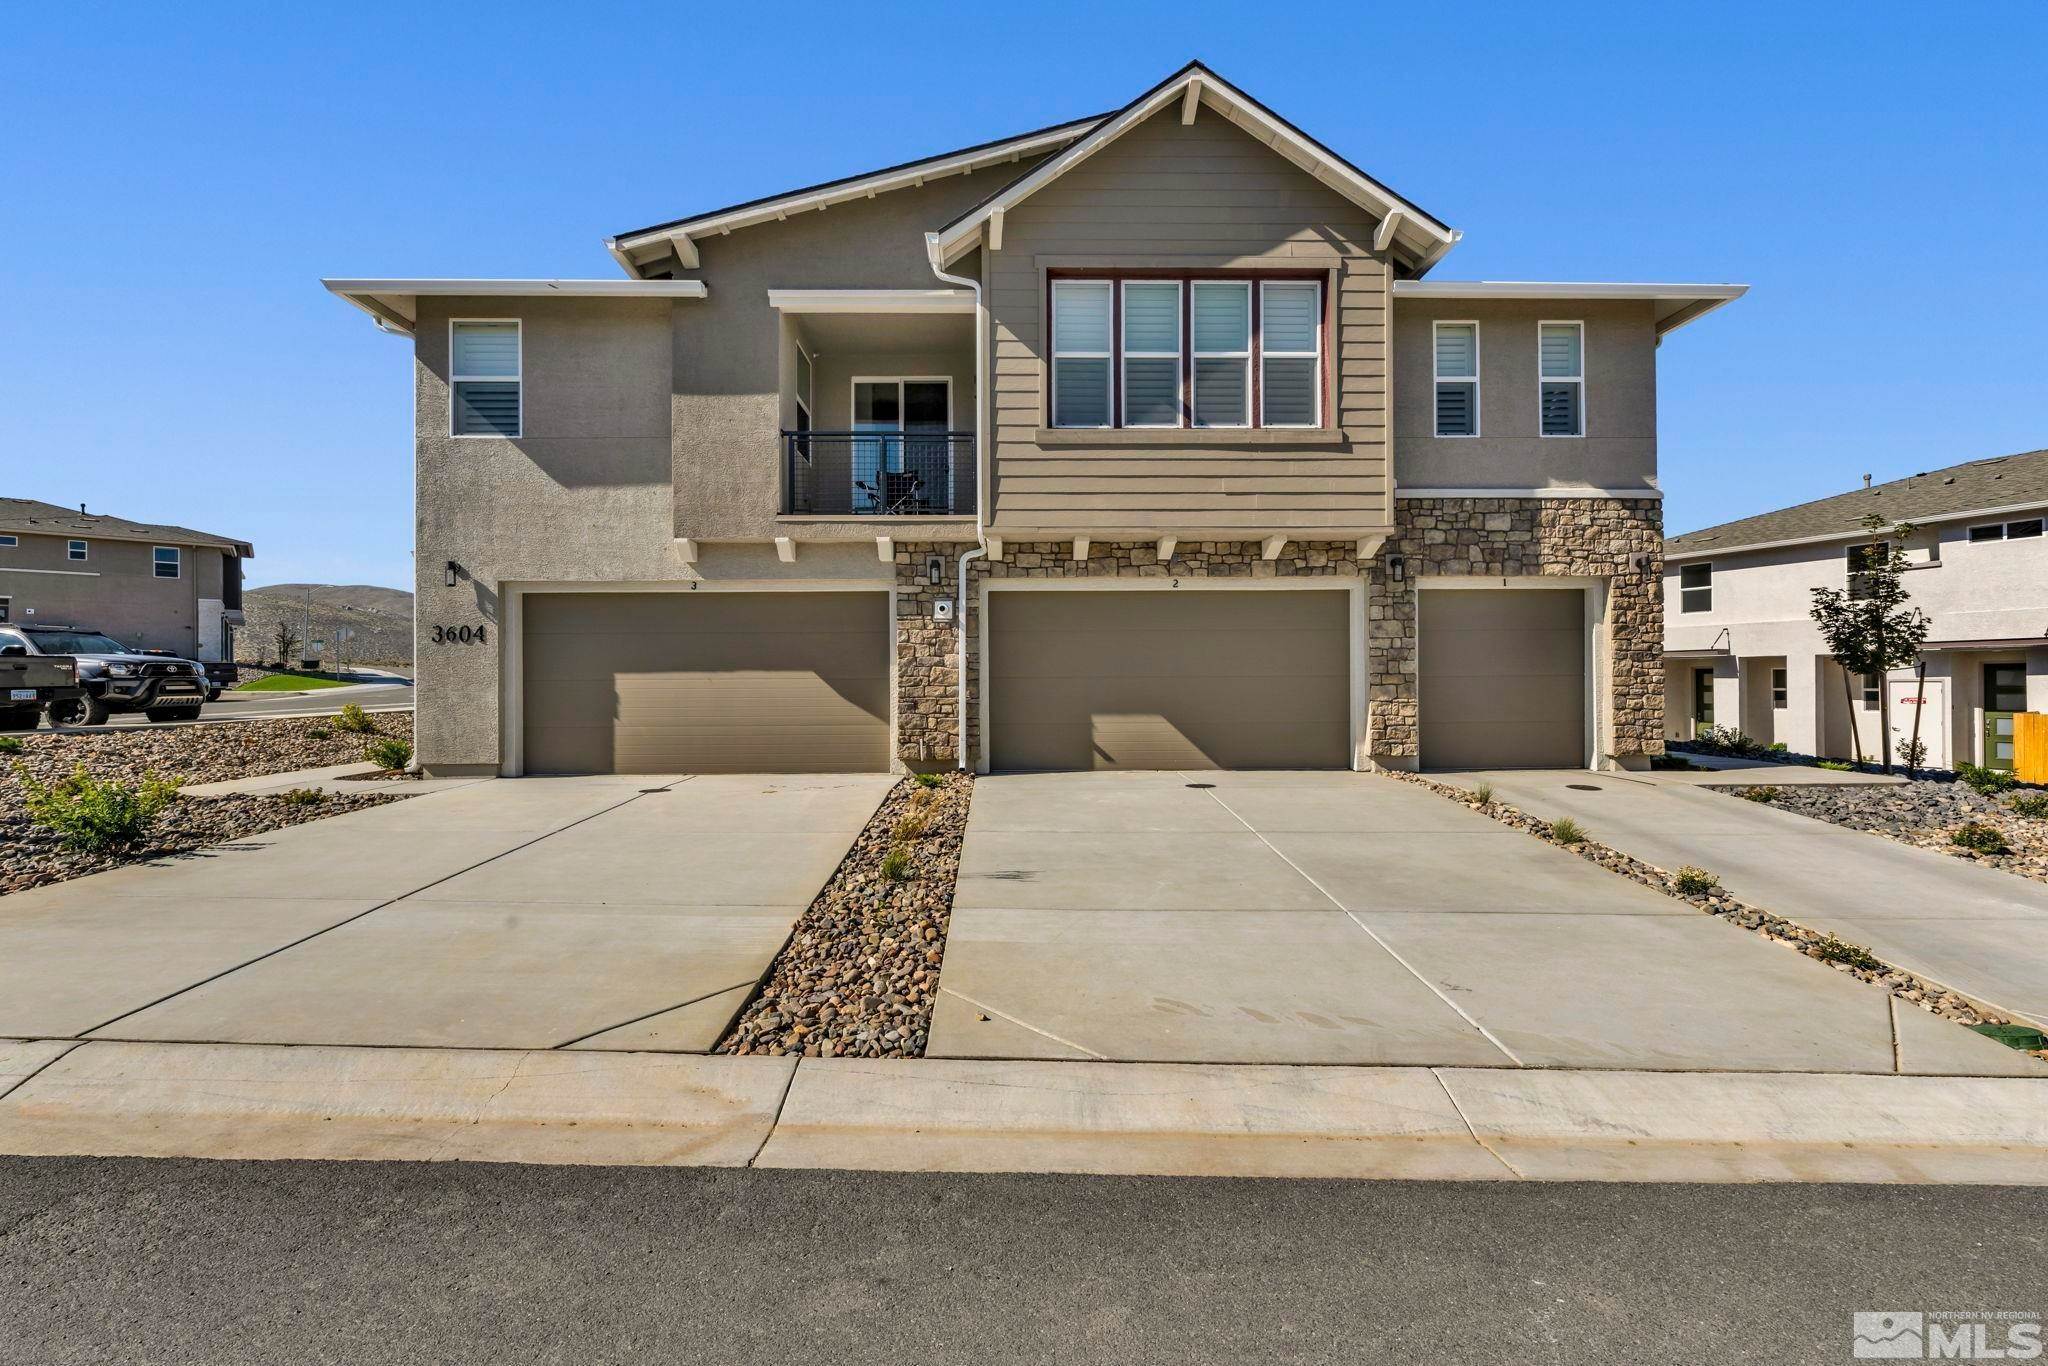 Condo / Townhouse for Active at 3604 Pulsar Lane Carson City, Nevada 89705 United States